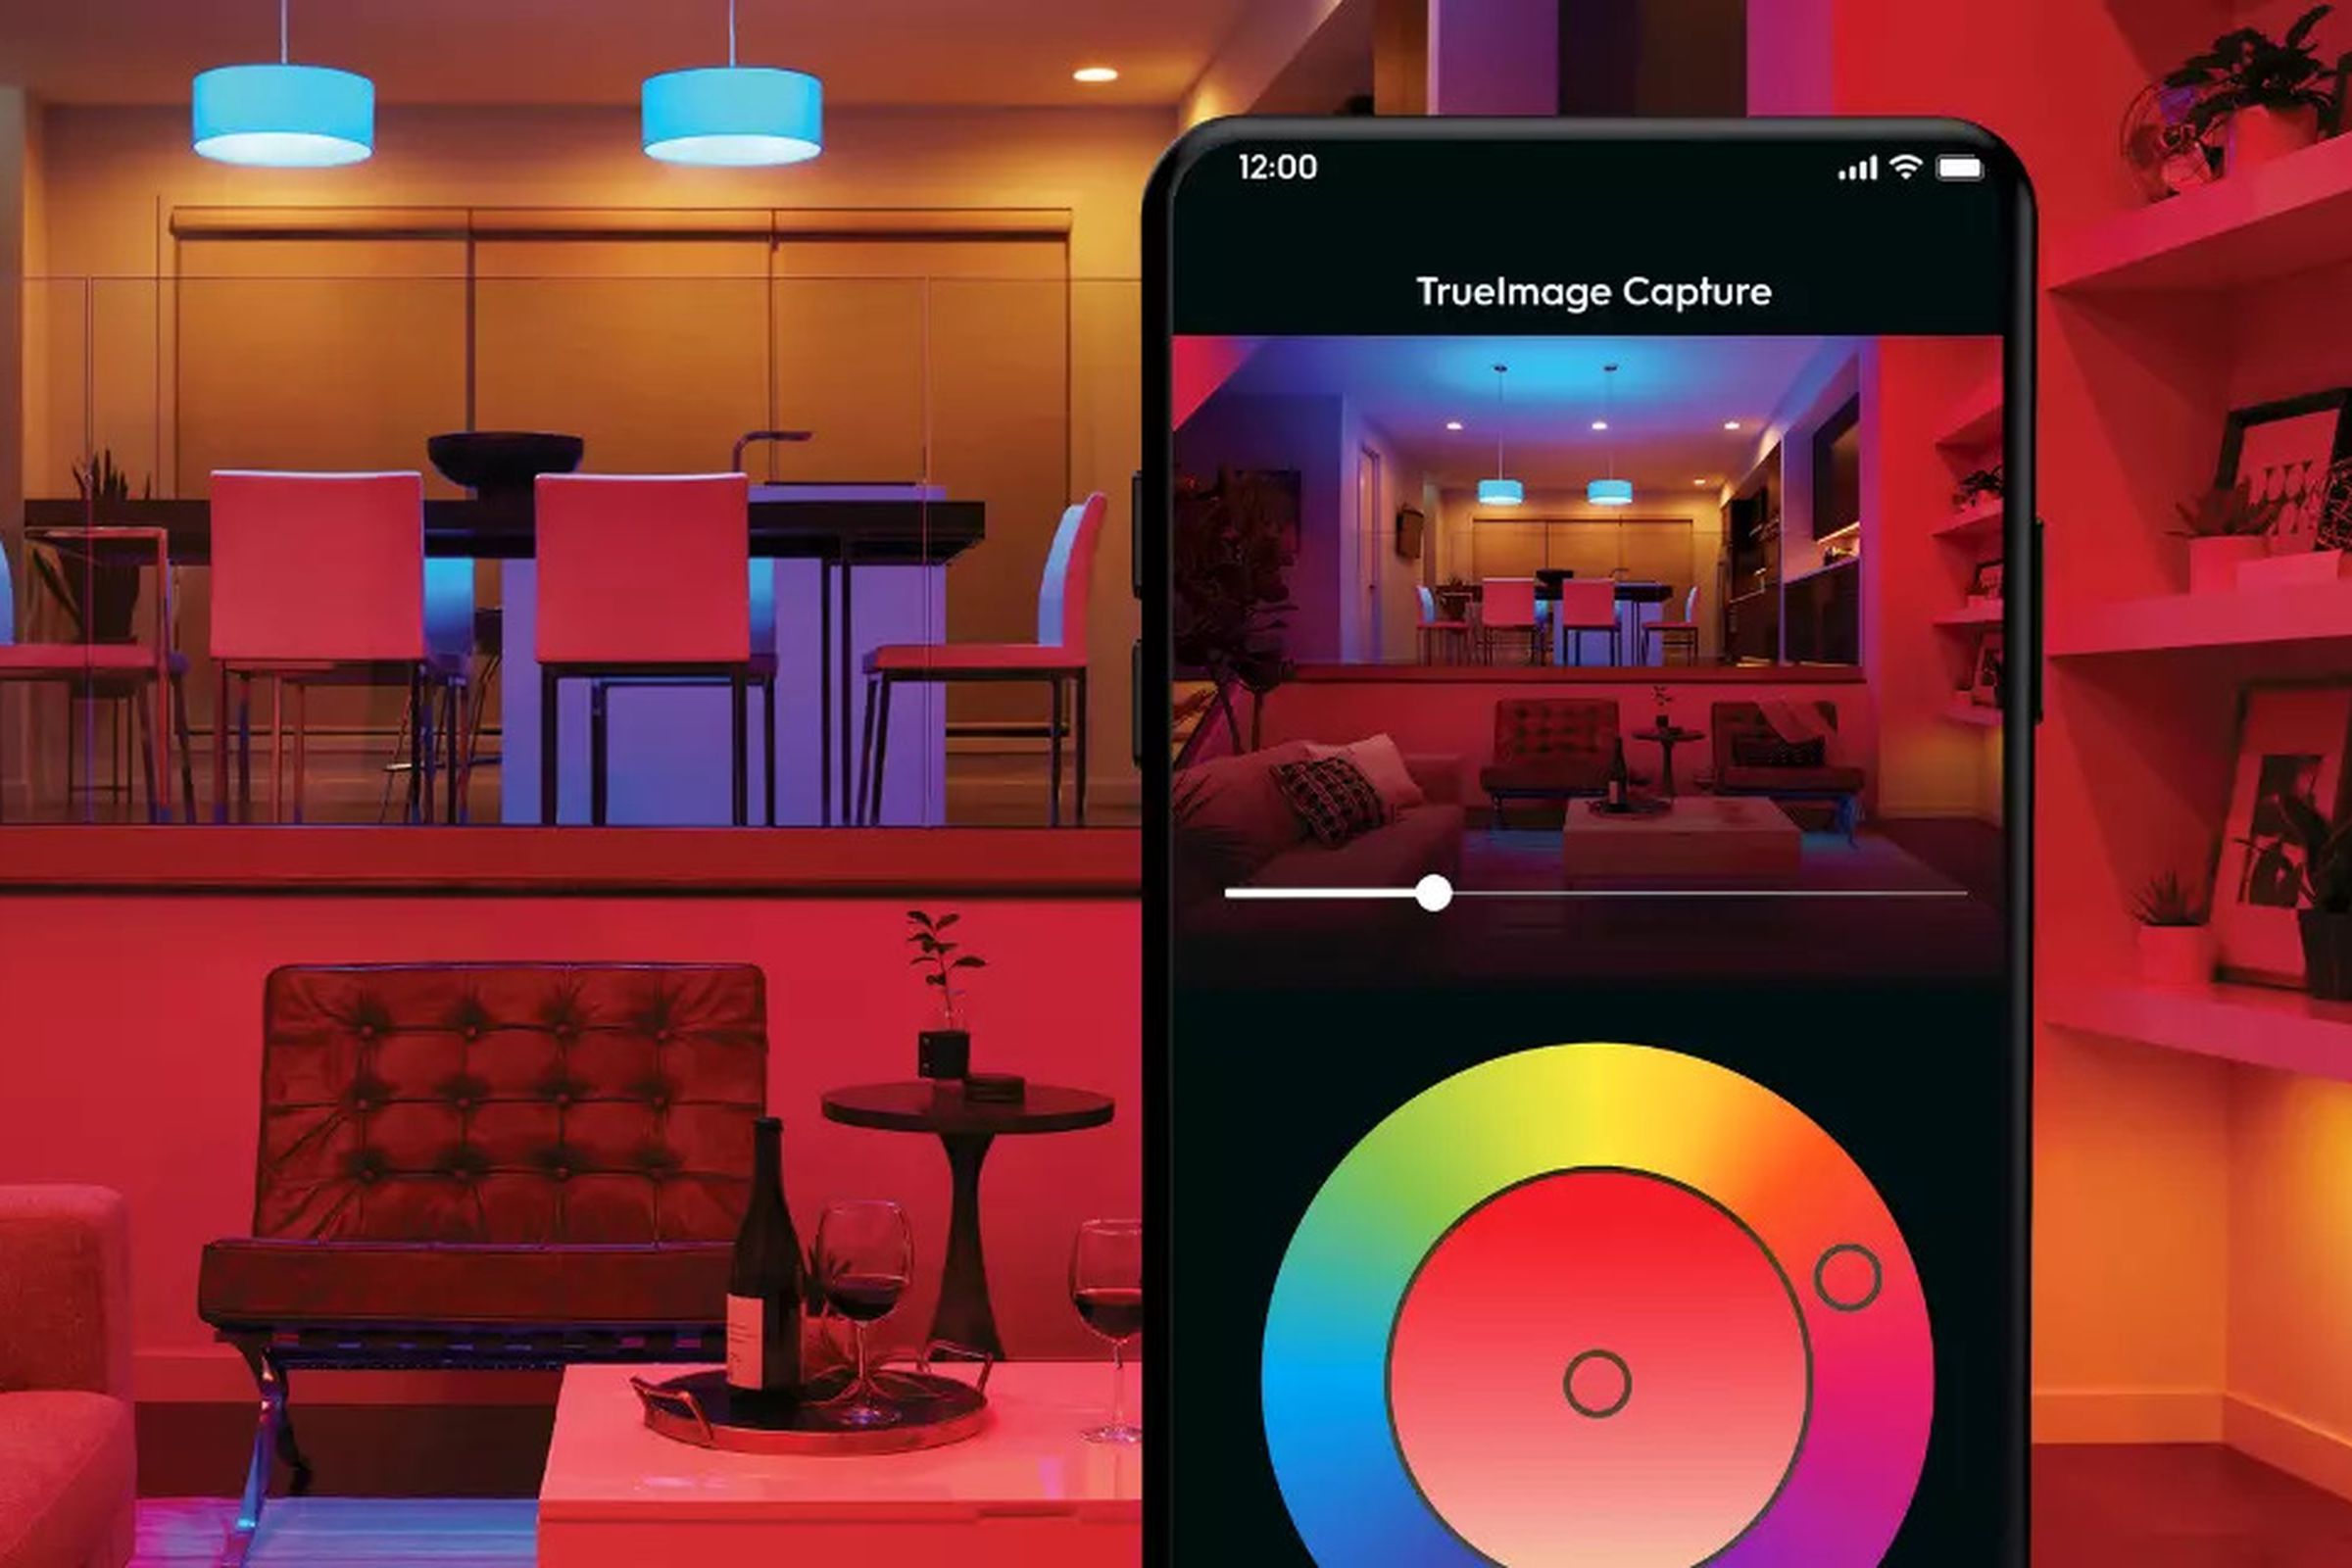 Cync’s line of smart home products now includes new bulb options, an outdoor camera, and a smart thermostat.